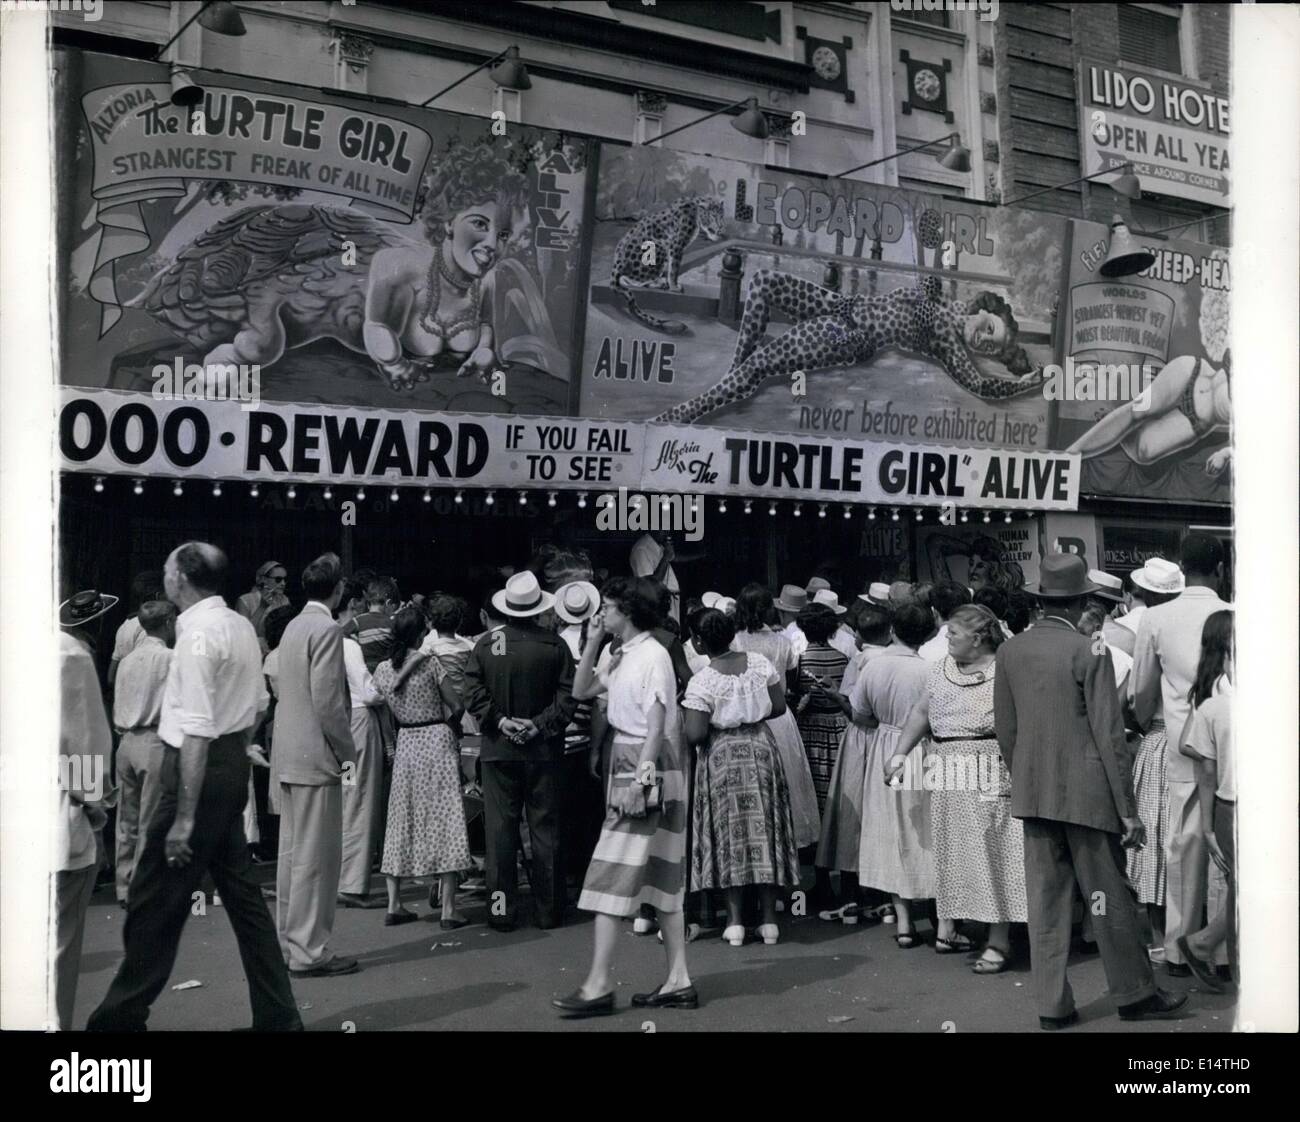 Apr. 18, 2012 - Coney Island: The freak shows get the crowds at Coney Island. The curiosity that marks us all is the key to the Stock Photo